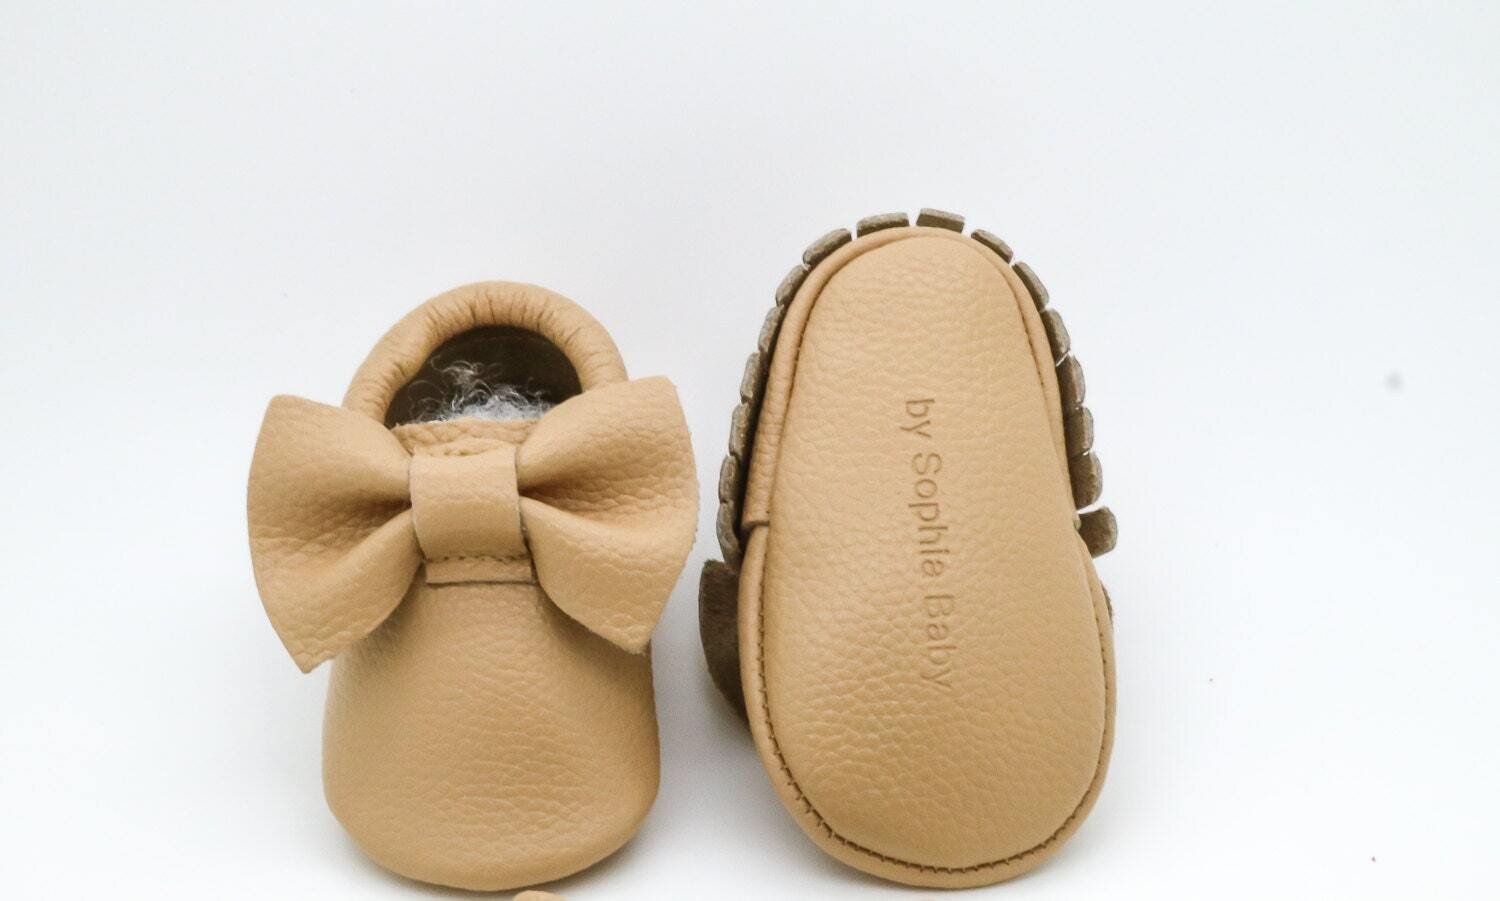 Baby Moccasins Baby Tan Caramel Bow Moccasins Baby Leather Shoes Genuine Leather Moccs Toddler Moccasins Baby Moccs Baby Shower Gift